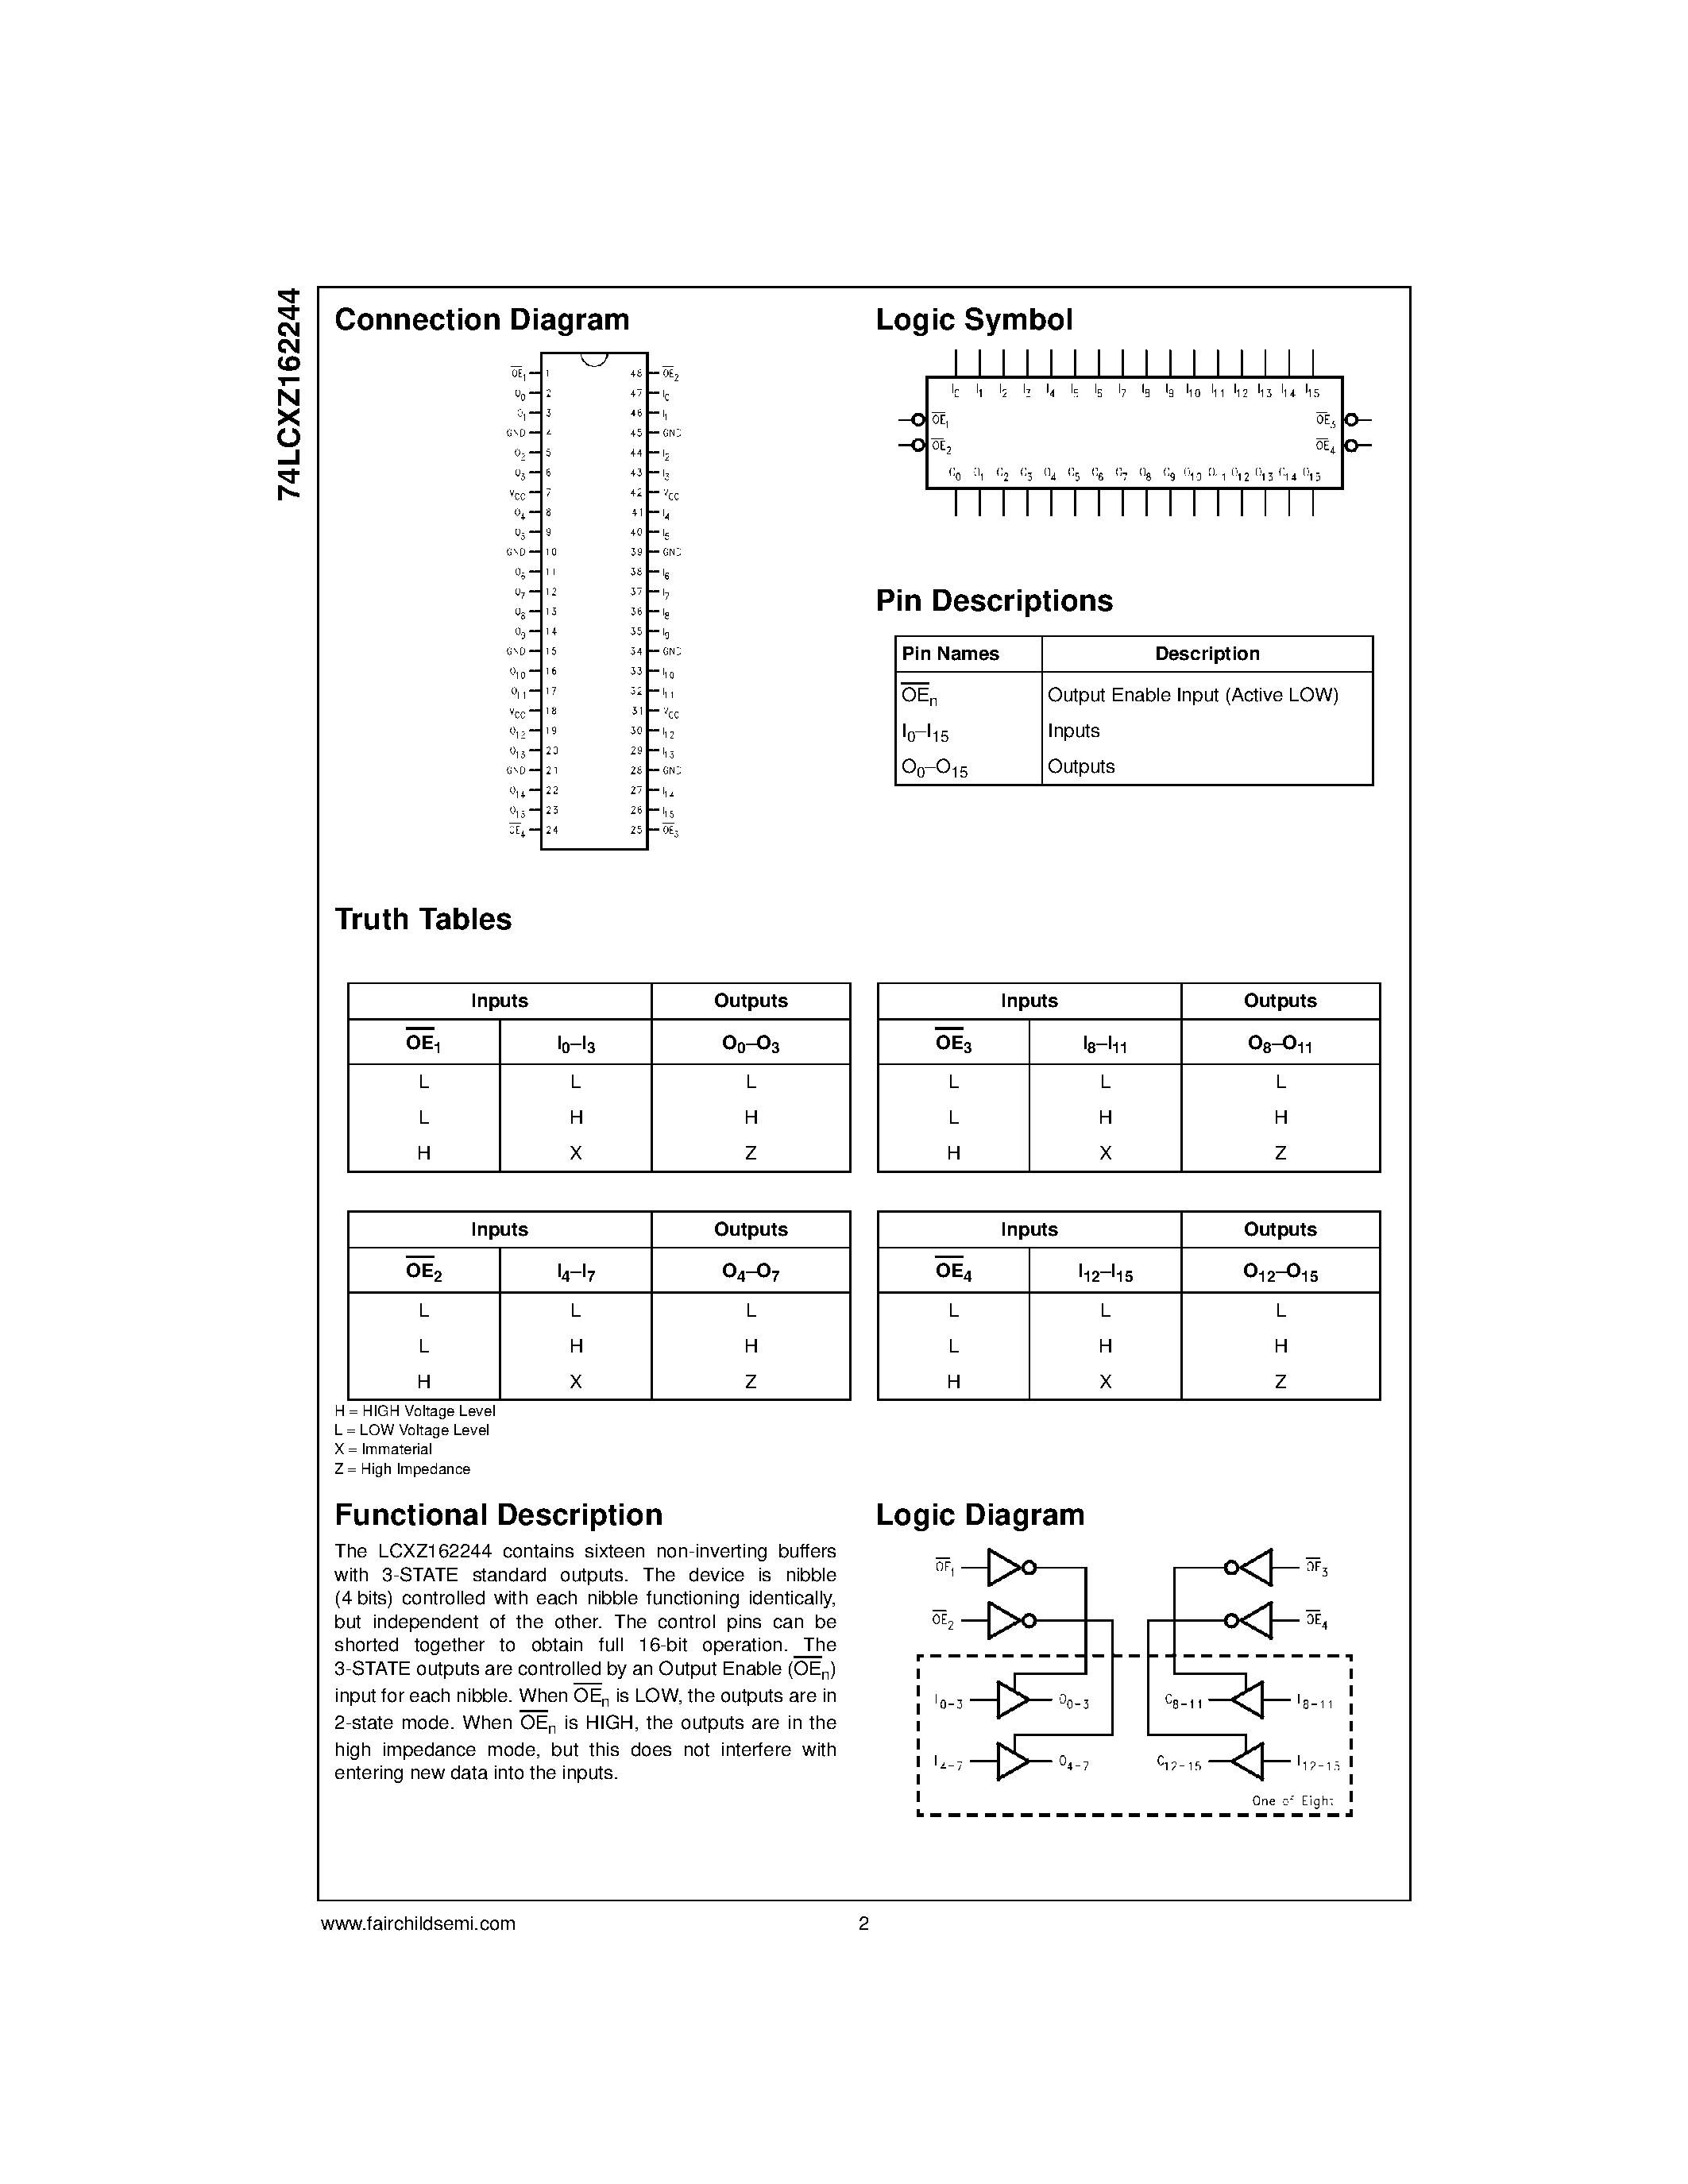 Datasheet 74LCXZ162244 - Low Voltage 16-Bit Buffer/Line Driver with 5V Tolerant Inputs/Outputs and 26 Series Resistors in the Outputs page 2